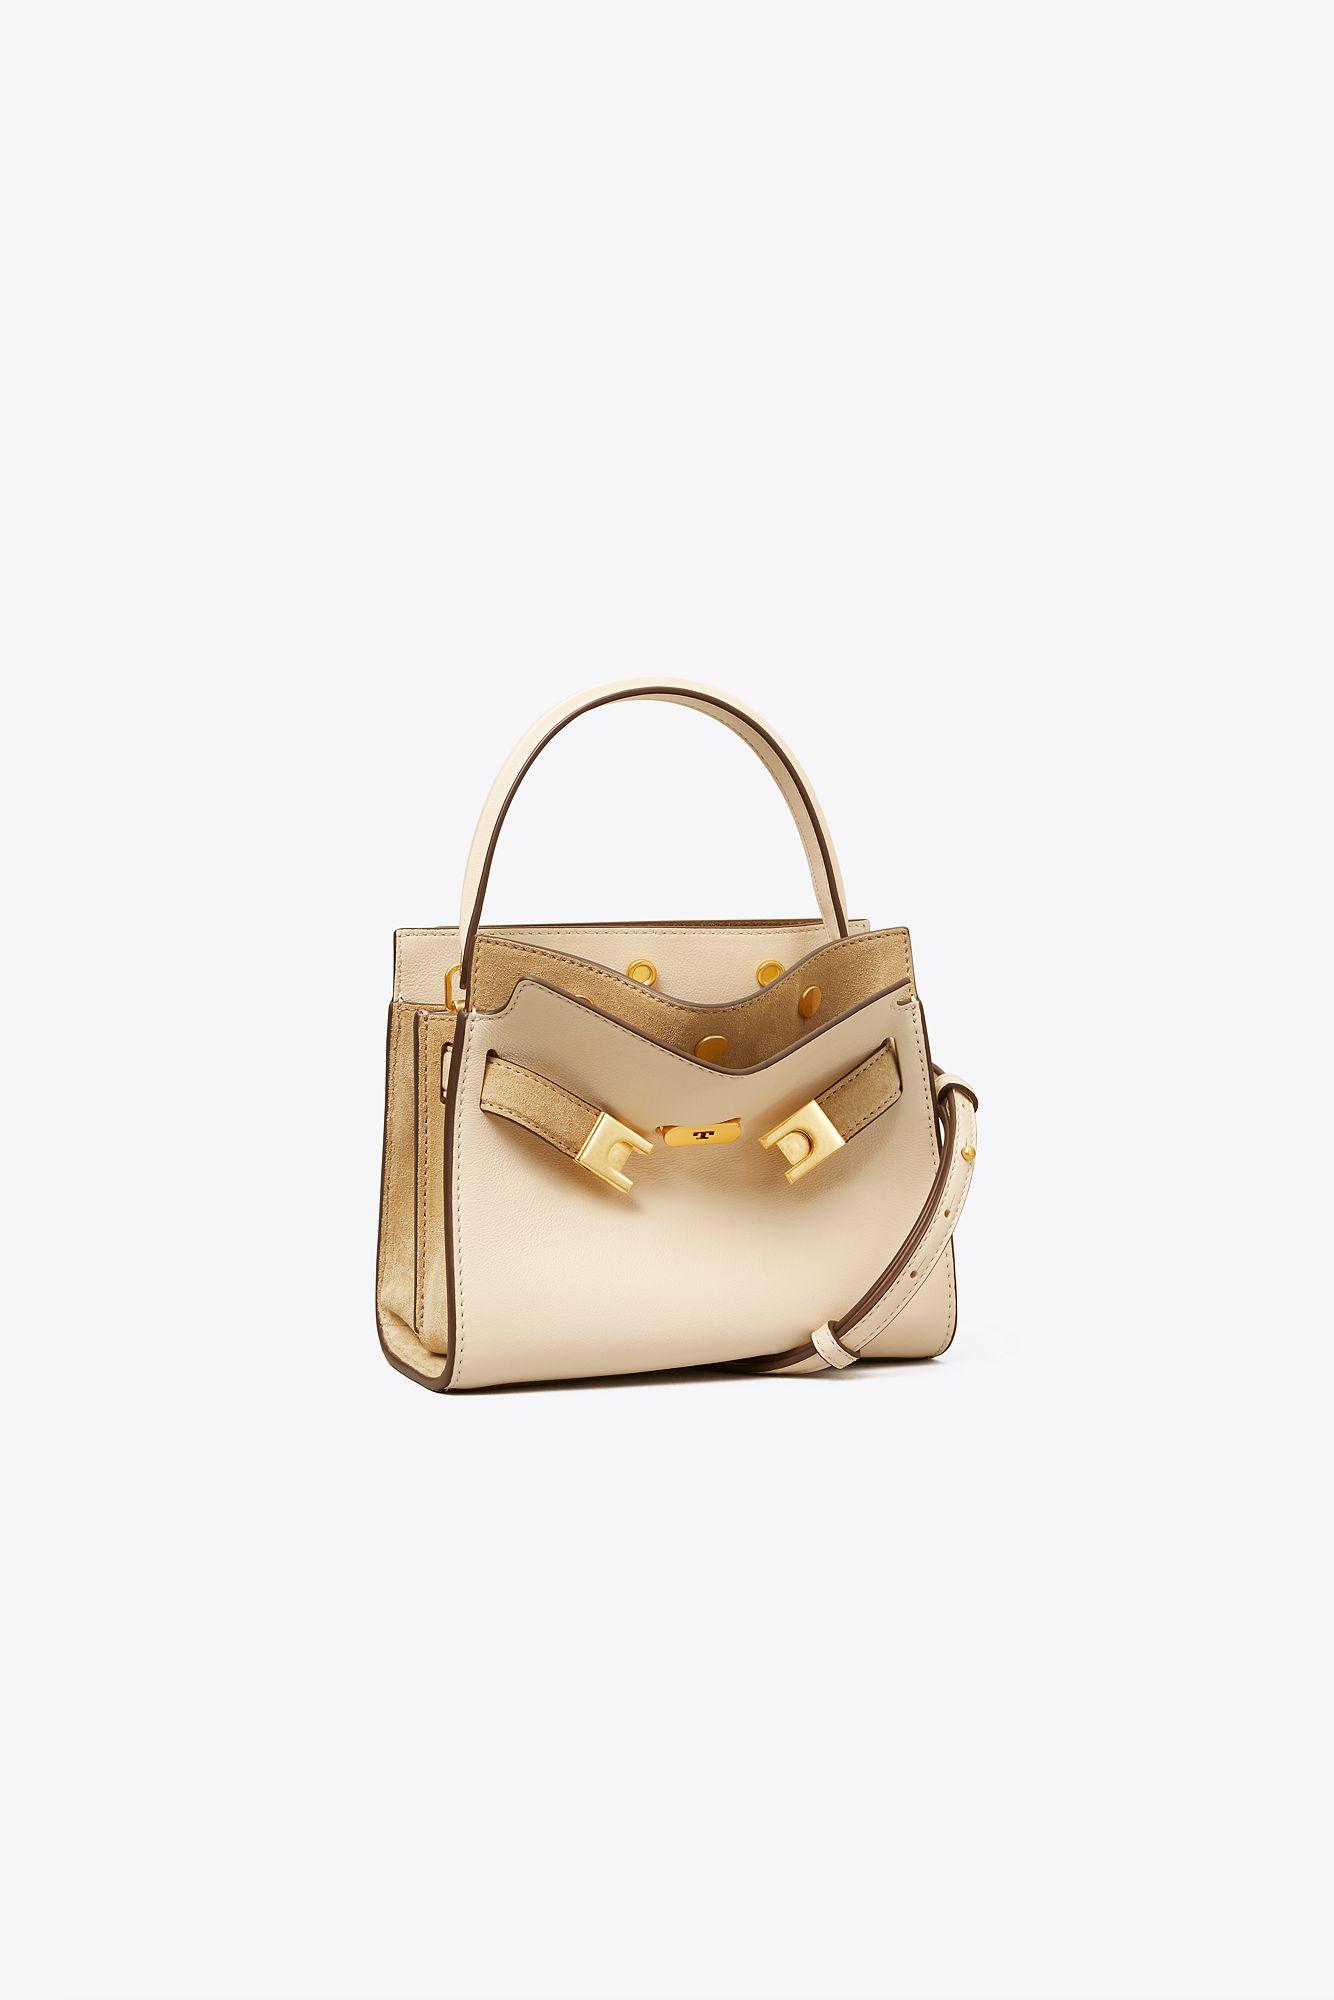 Comparing All 3 Sizes of the Tory Burch Lee Radziwill Double Bag